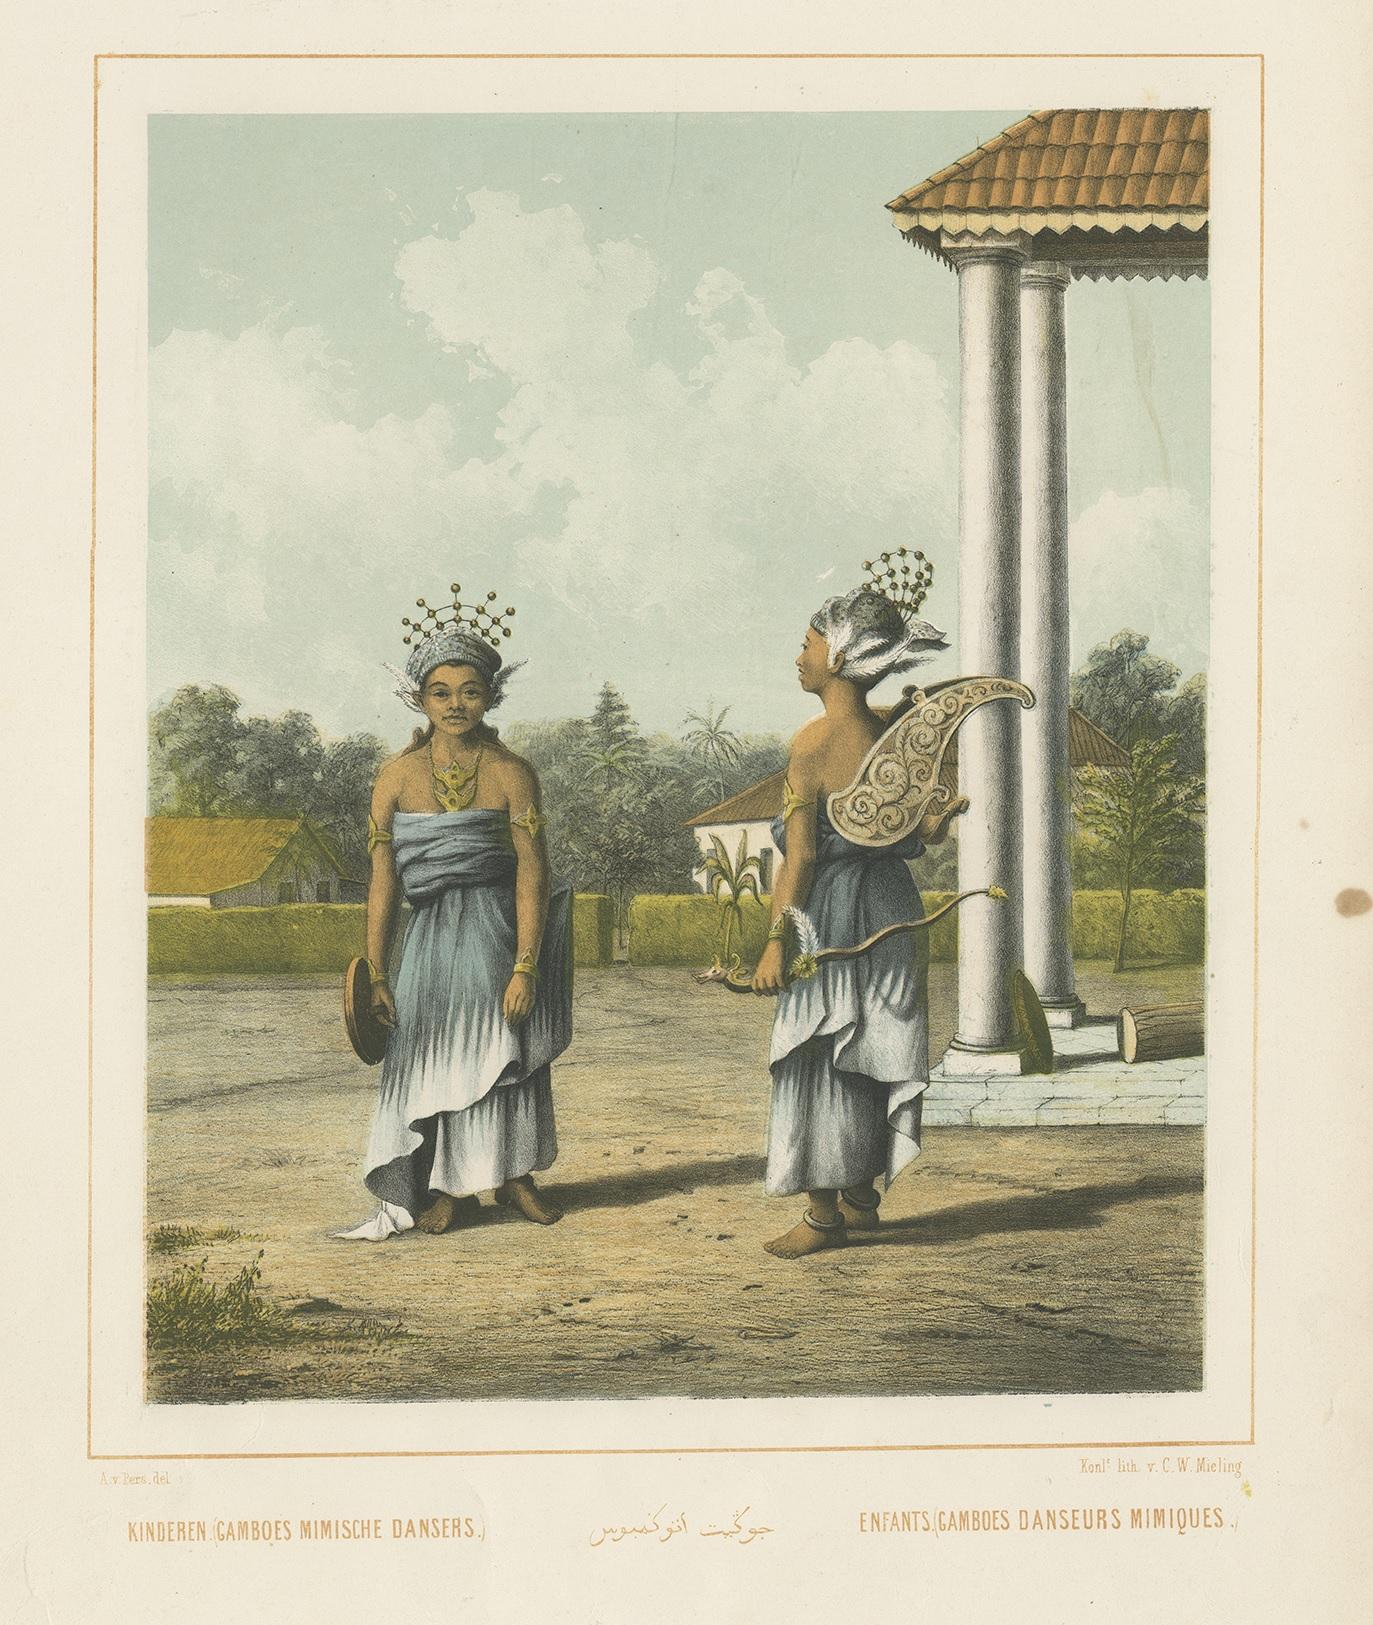 Antique print titled 'Kinderen (Gamboes) Mimische Dansers - Enfants (Gamboes) Danseurs Mimiques'. Colored lithograph of two Indonesian children dressed up as dancers. This print originates from 'Nederlandsch Oost-Indische typen' after work by